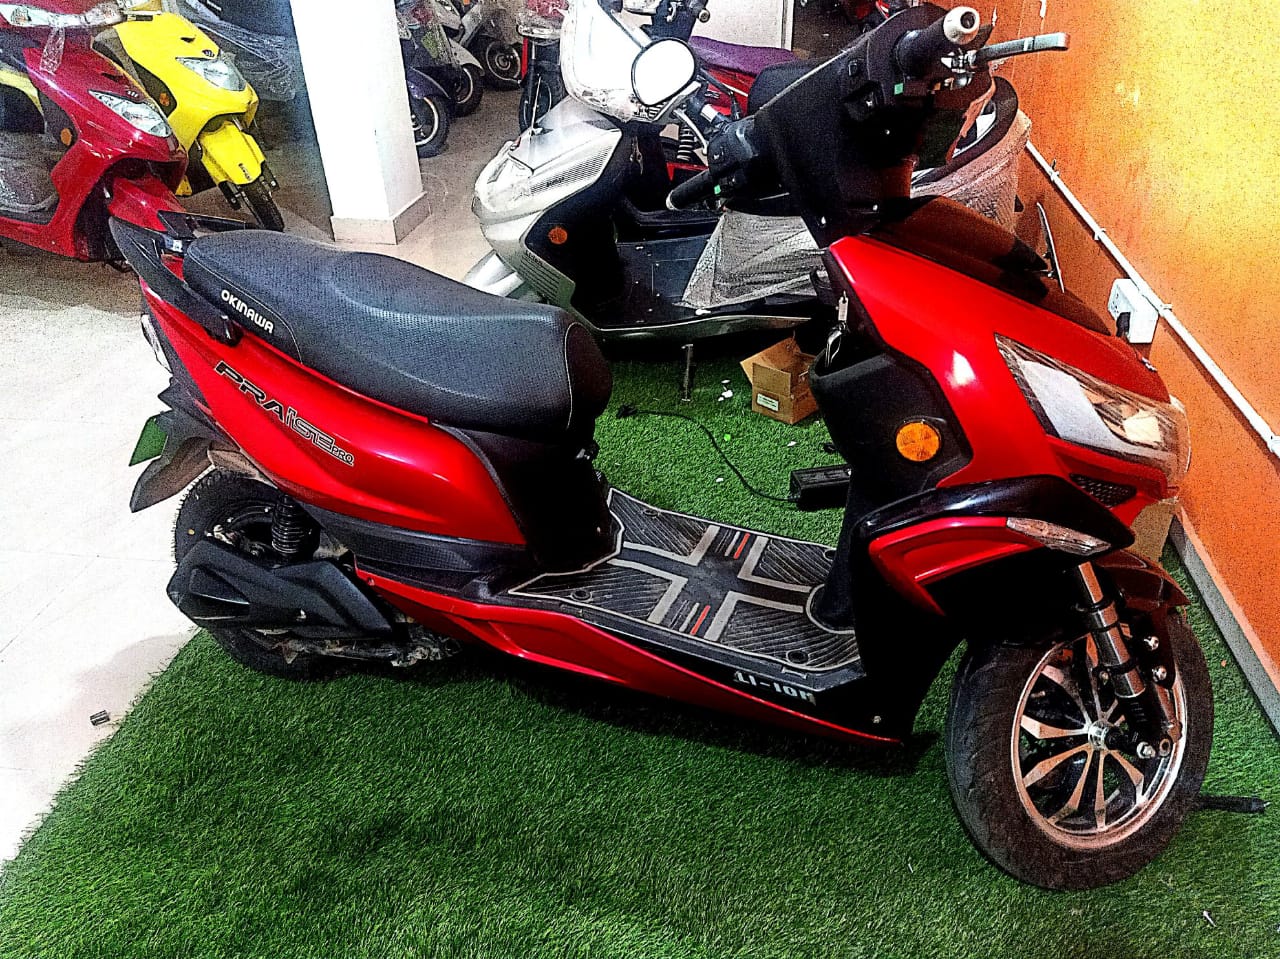 Okinawa praise pro WITH 5 YEARS INSURANCE AND TEMPORARY REGISTRATION – OKINAWA SCOOTERS WORLD